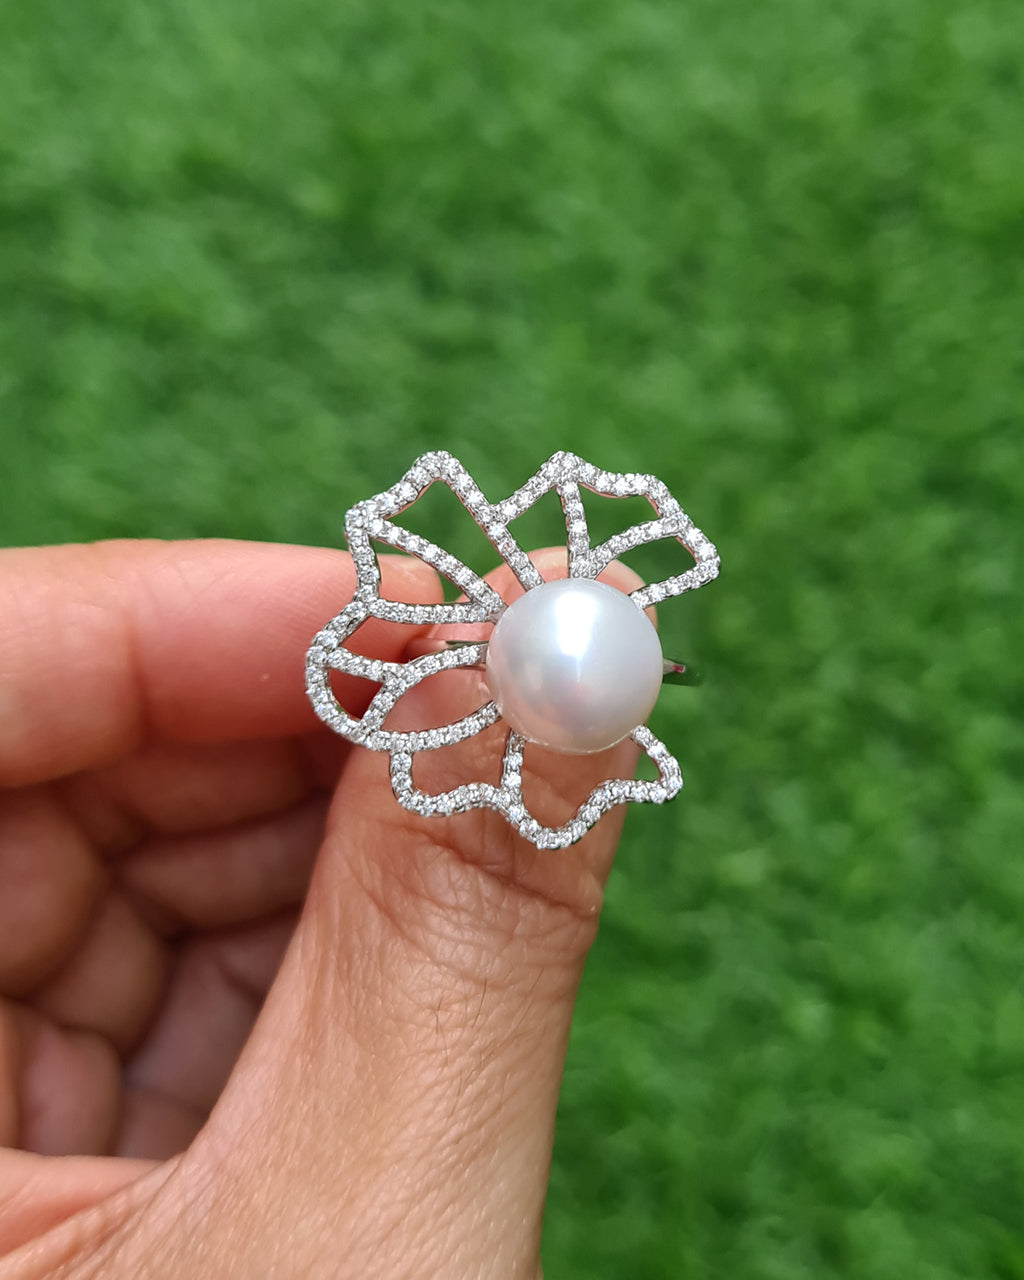 925 Sterling Silver White Pearl Ring